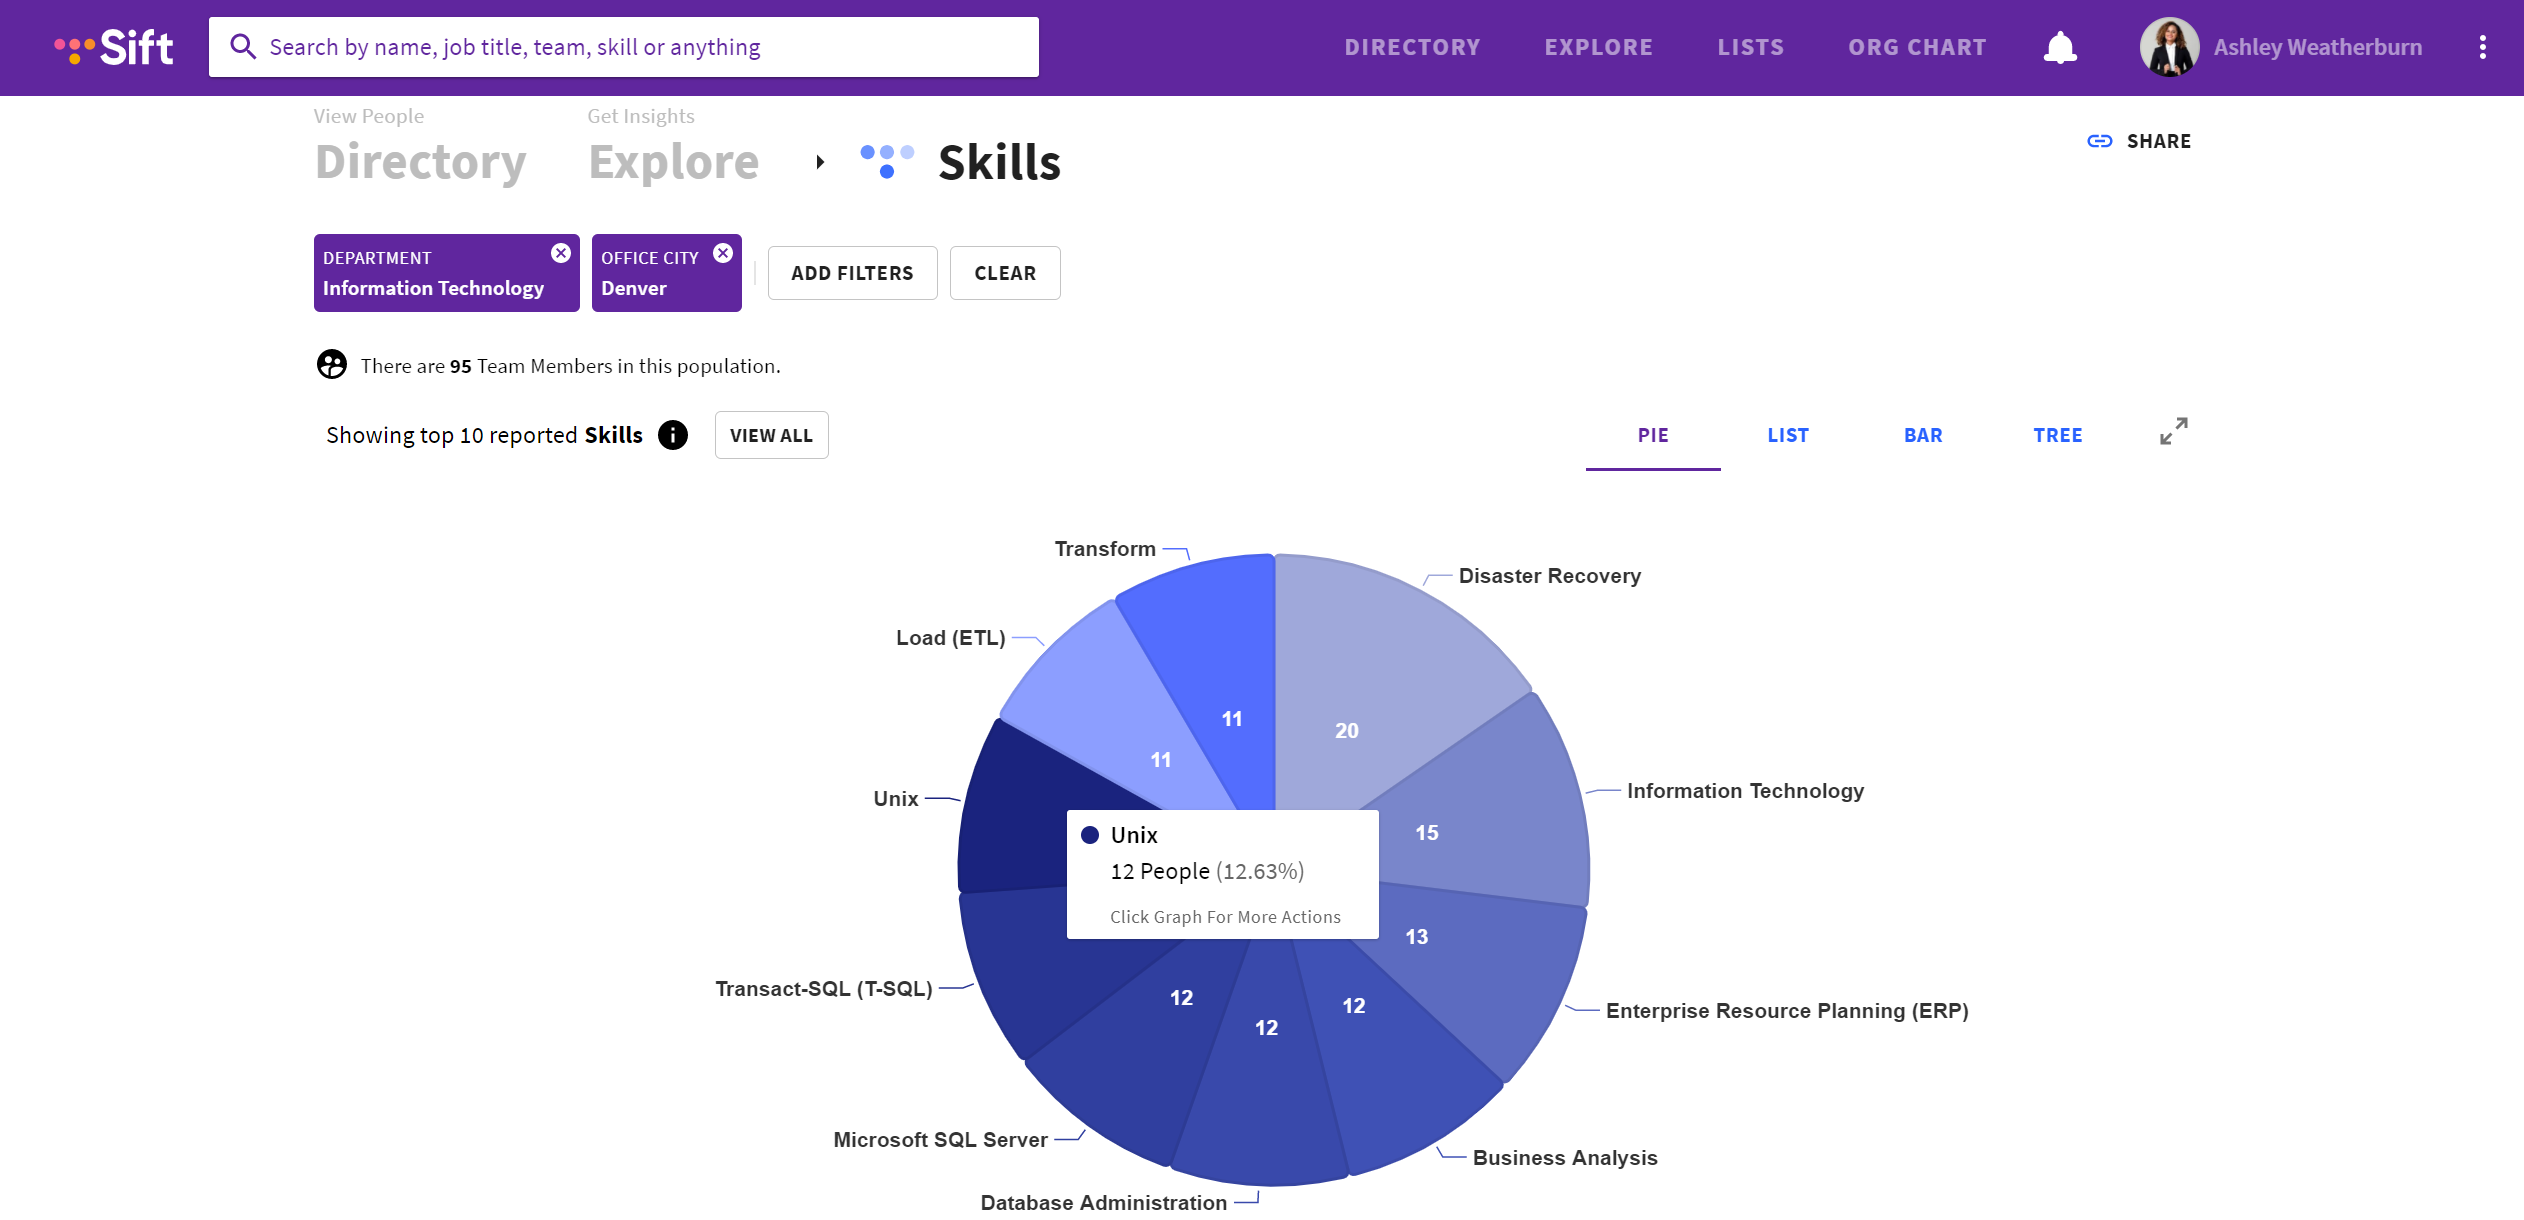 Quickly visualize breakdowns of your organization’s skills, roles, locations, departments, and much more.